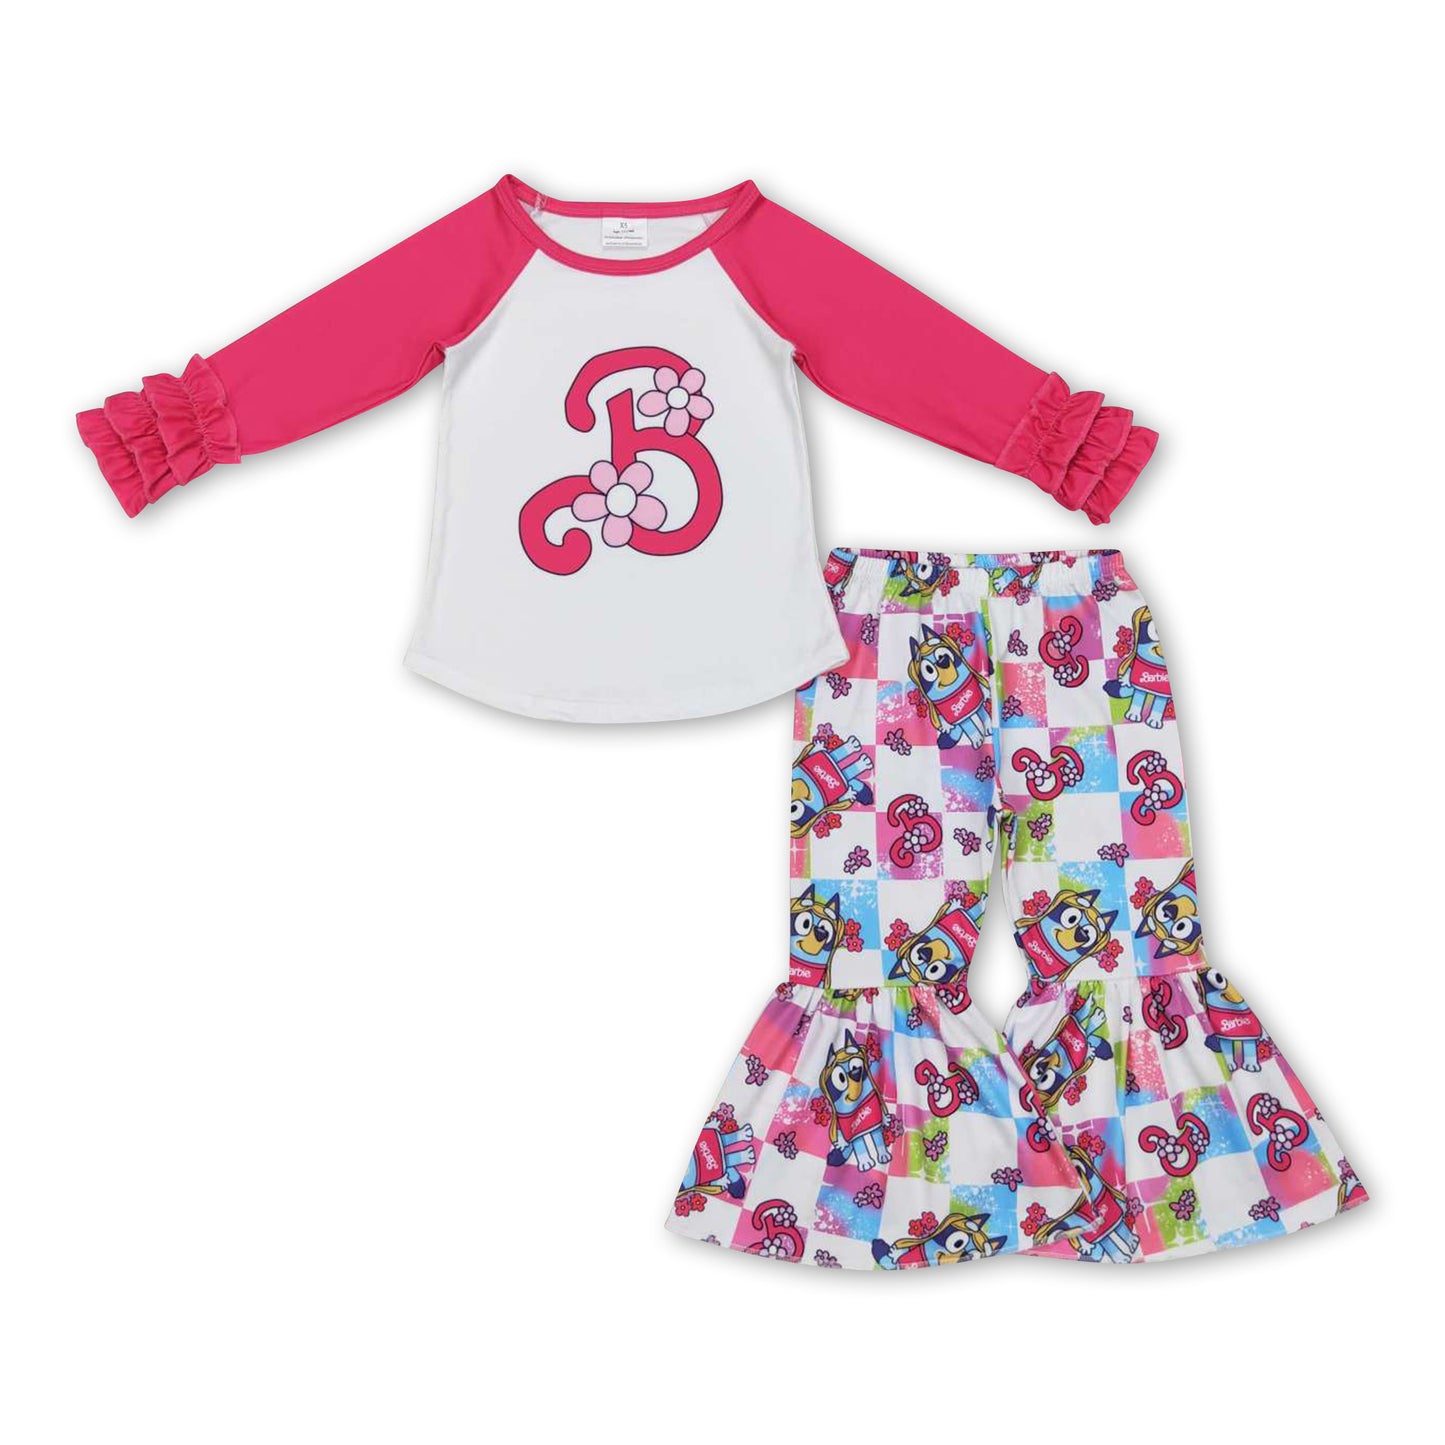 Hot pink floral B top dogs pants party girls outfits – Yawoo Garments